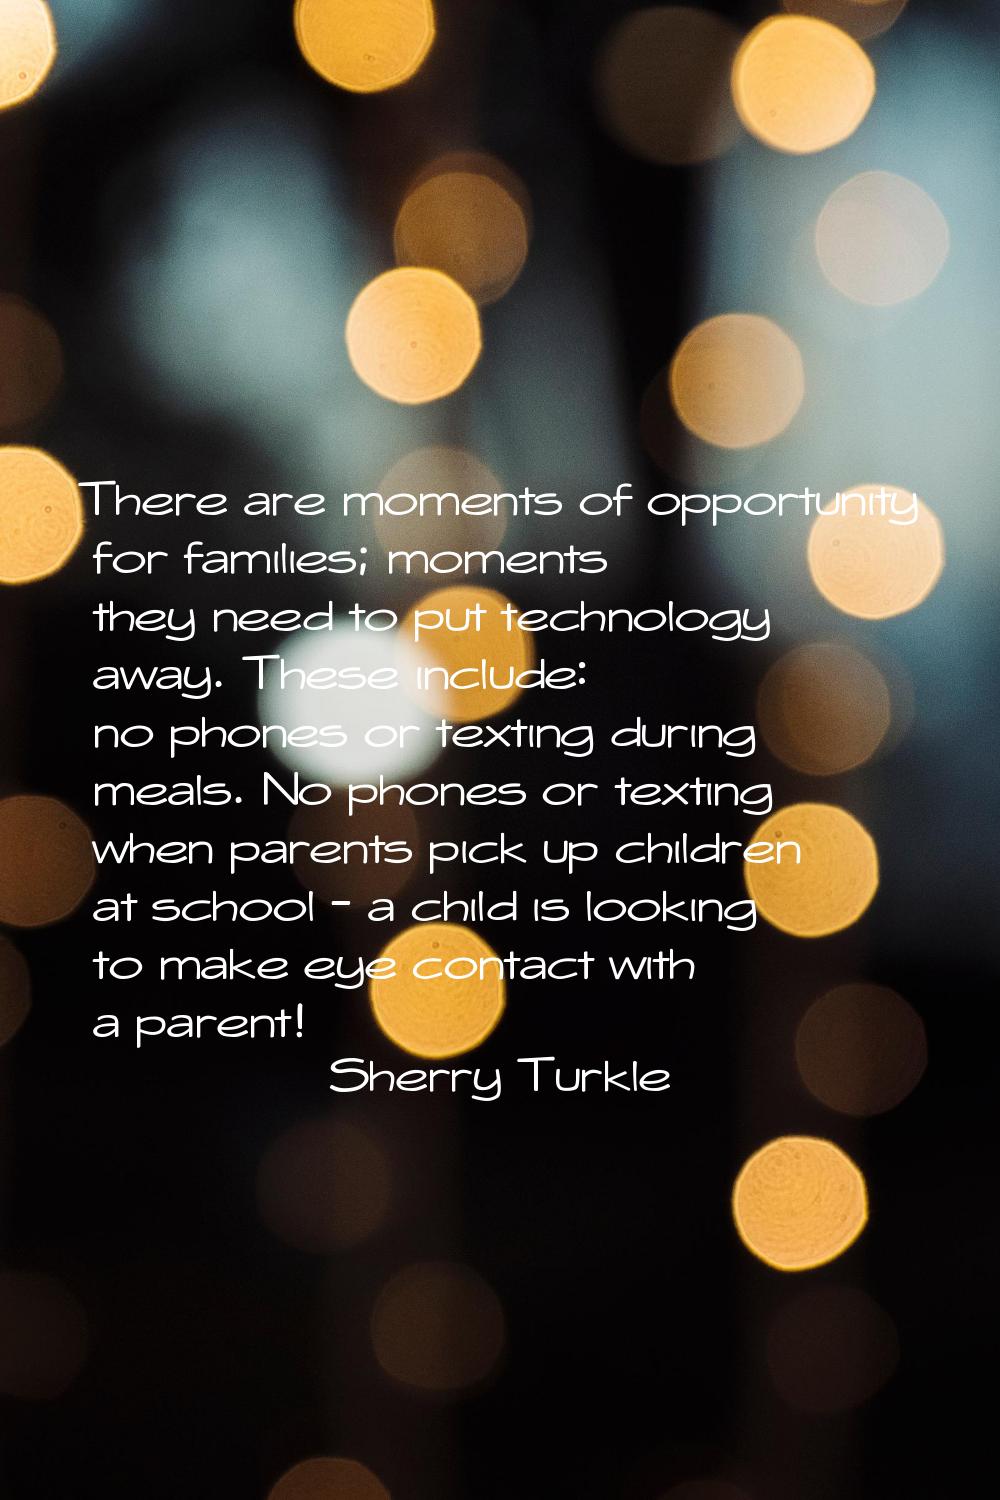 There are moments of opportunity for families; moments they need to put technology away. These incl